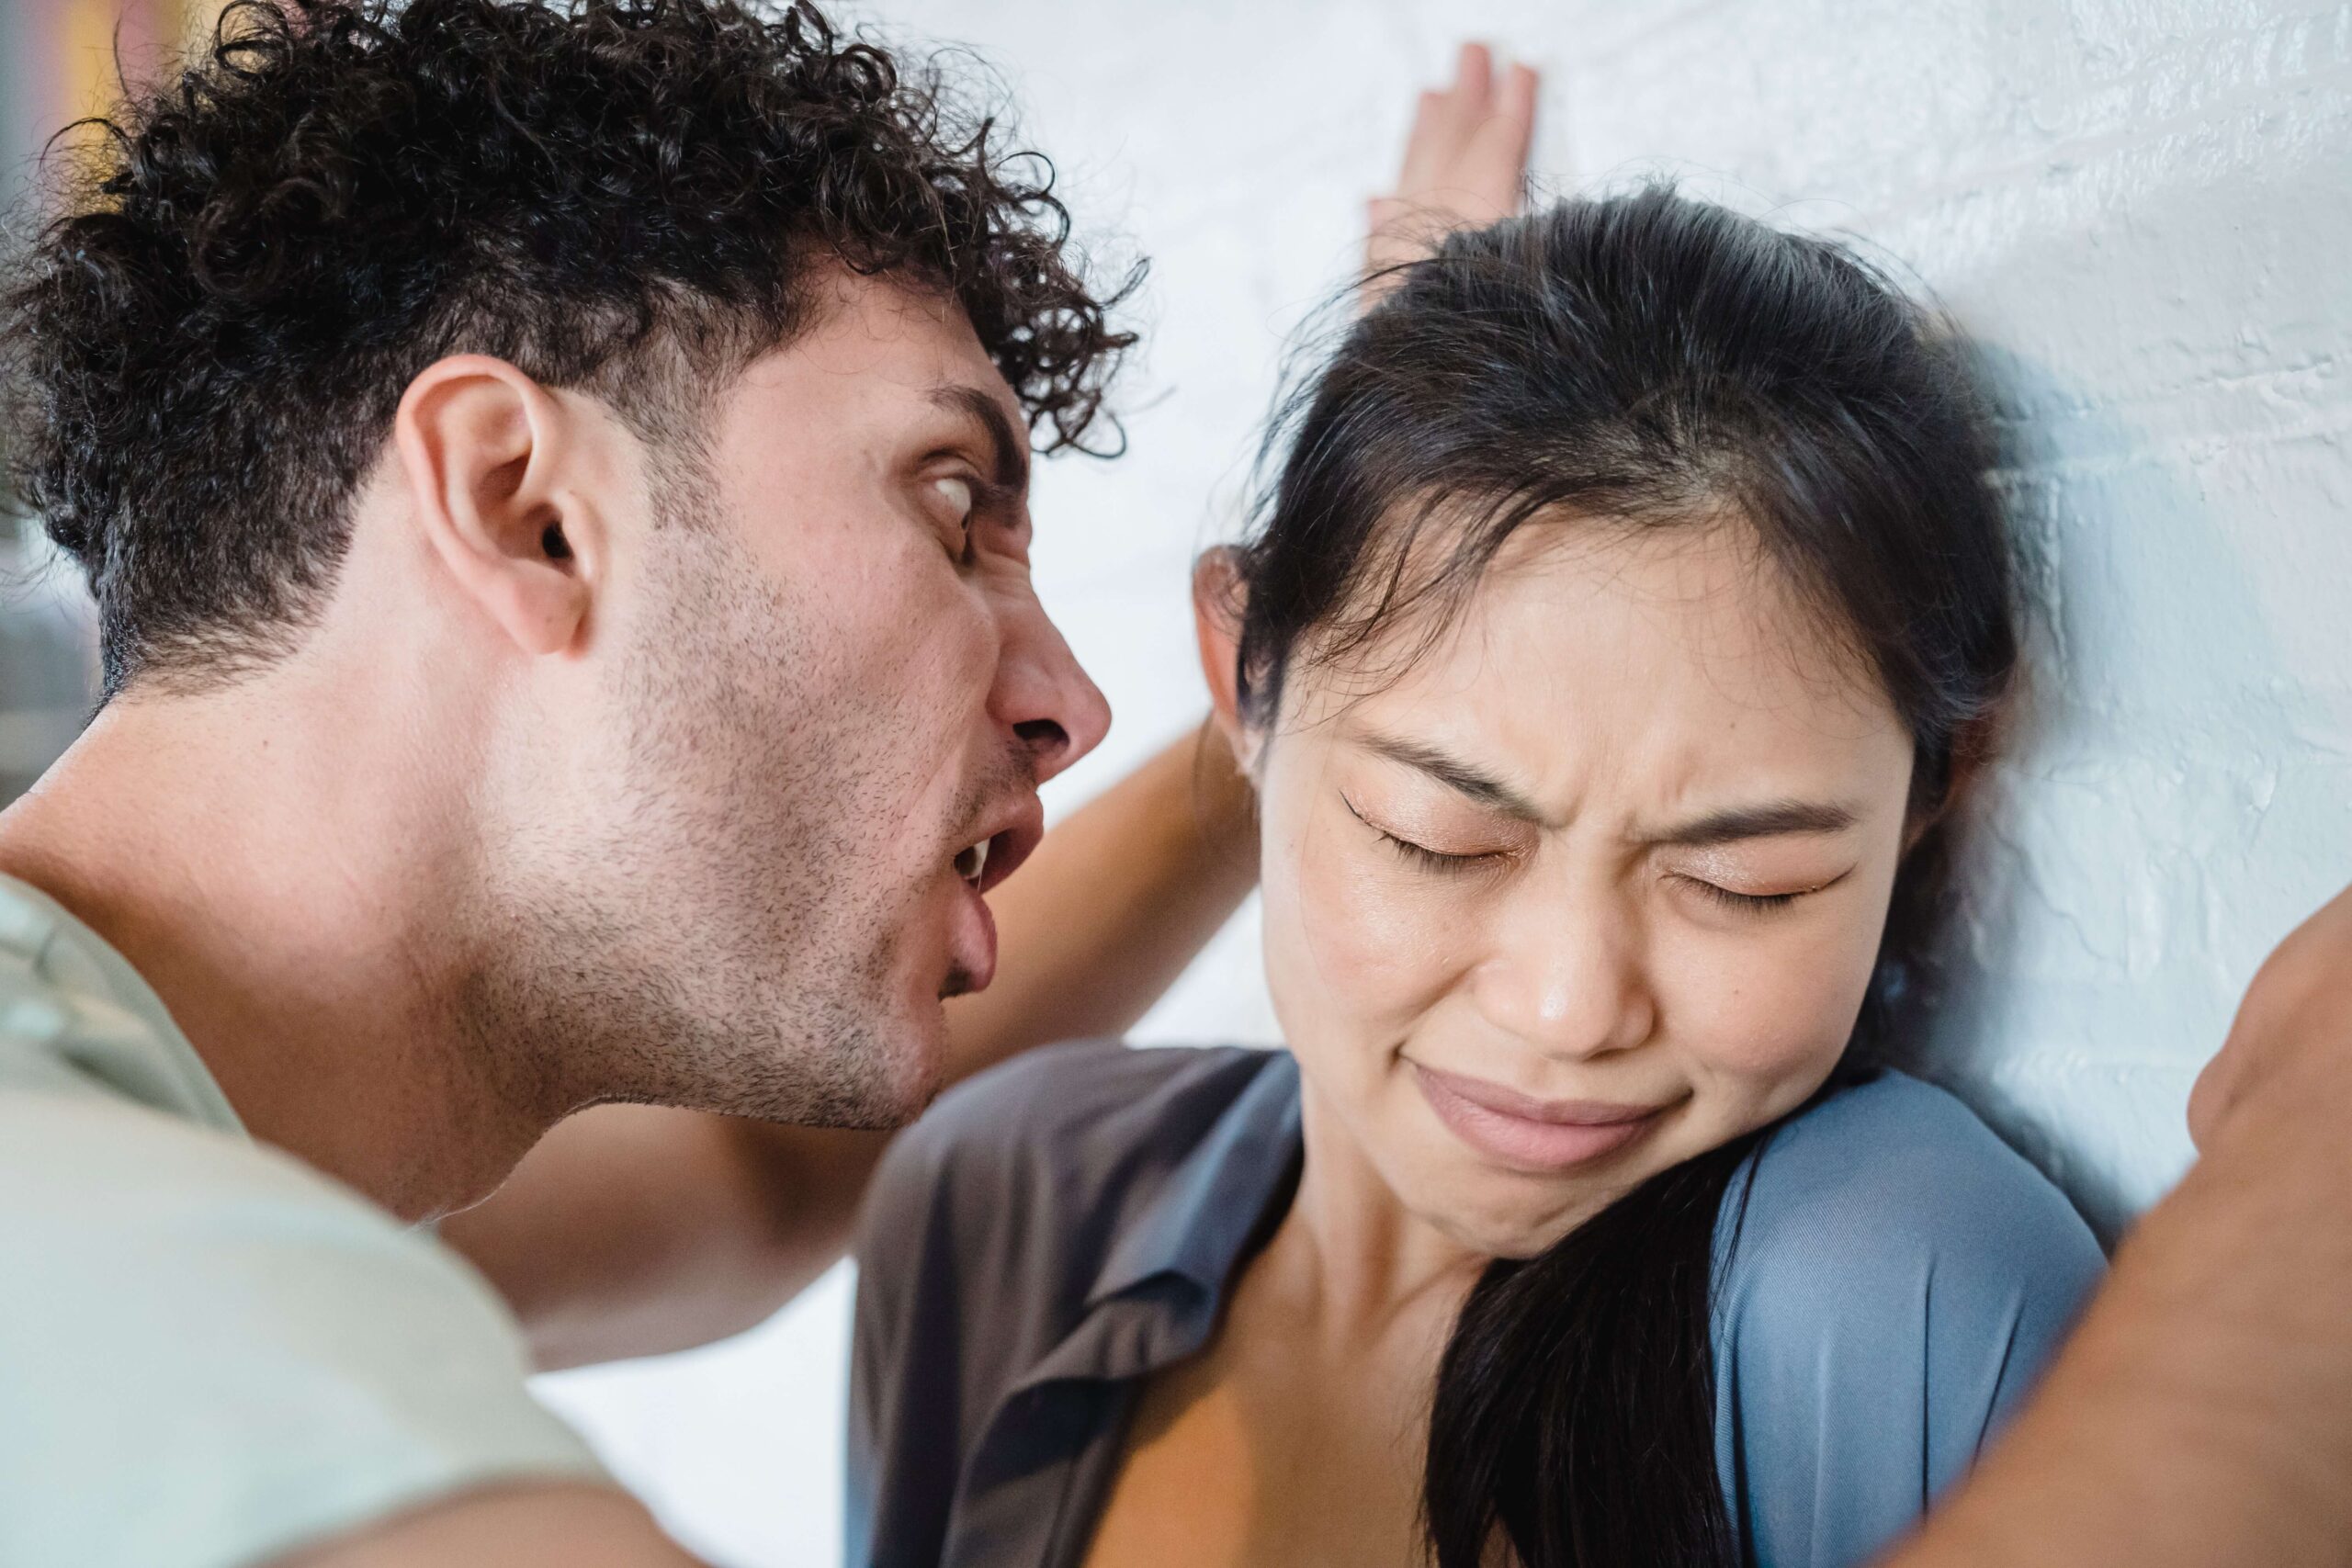 What is Maryland self-defense law?